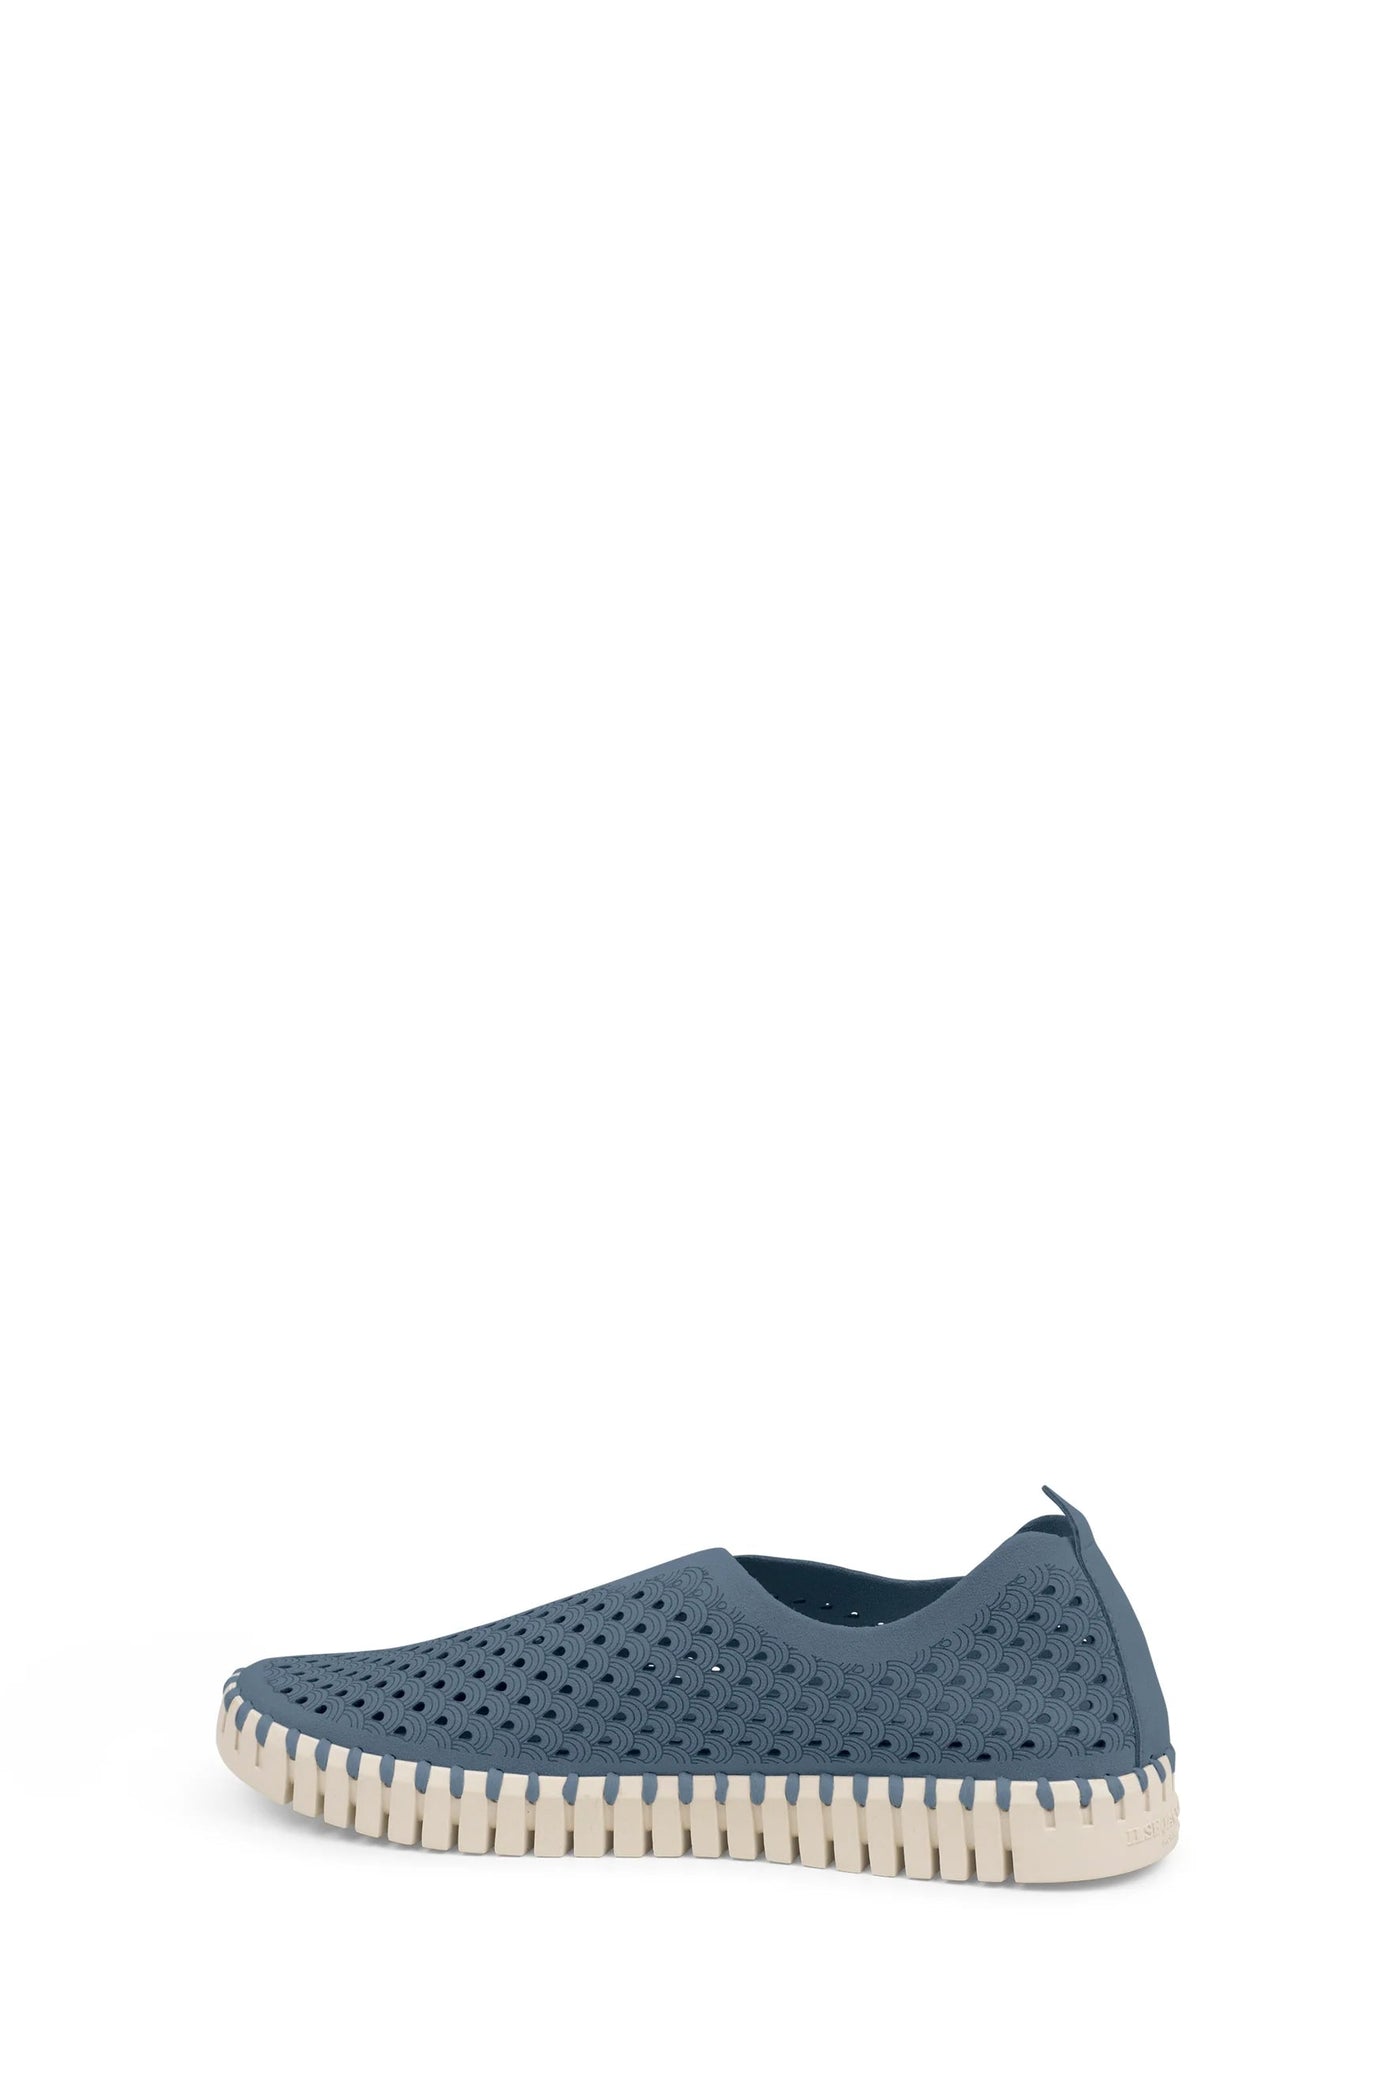 Ilse Jacobsen Tulip Shoes in Grey Blue colour-Accessories-Ohh! By Gum - Shop Sustainable